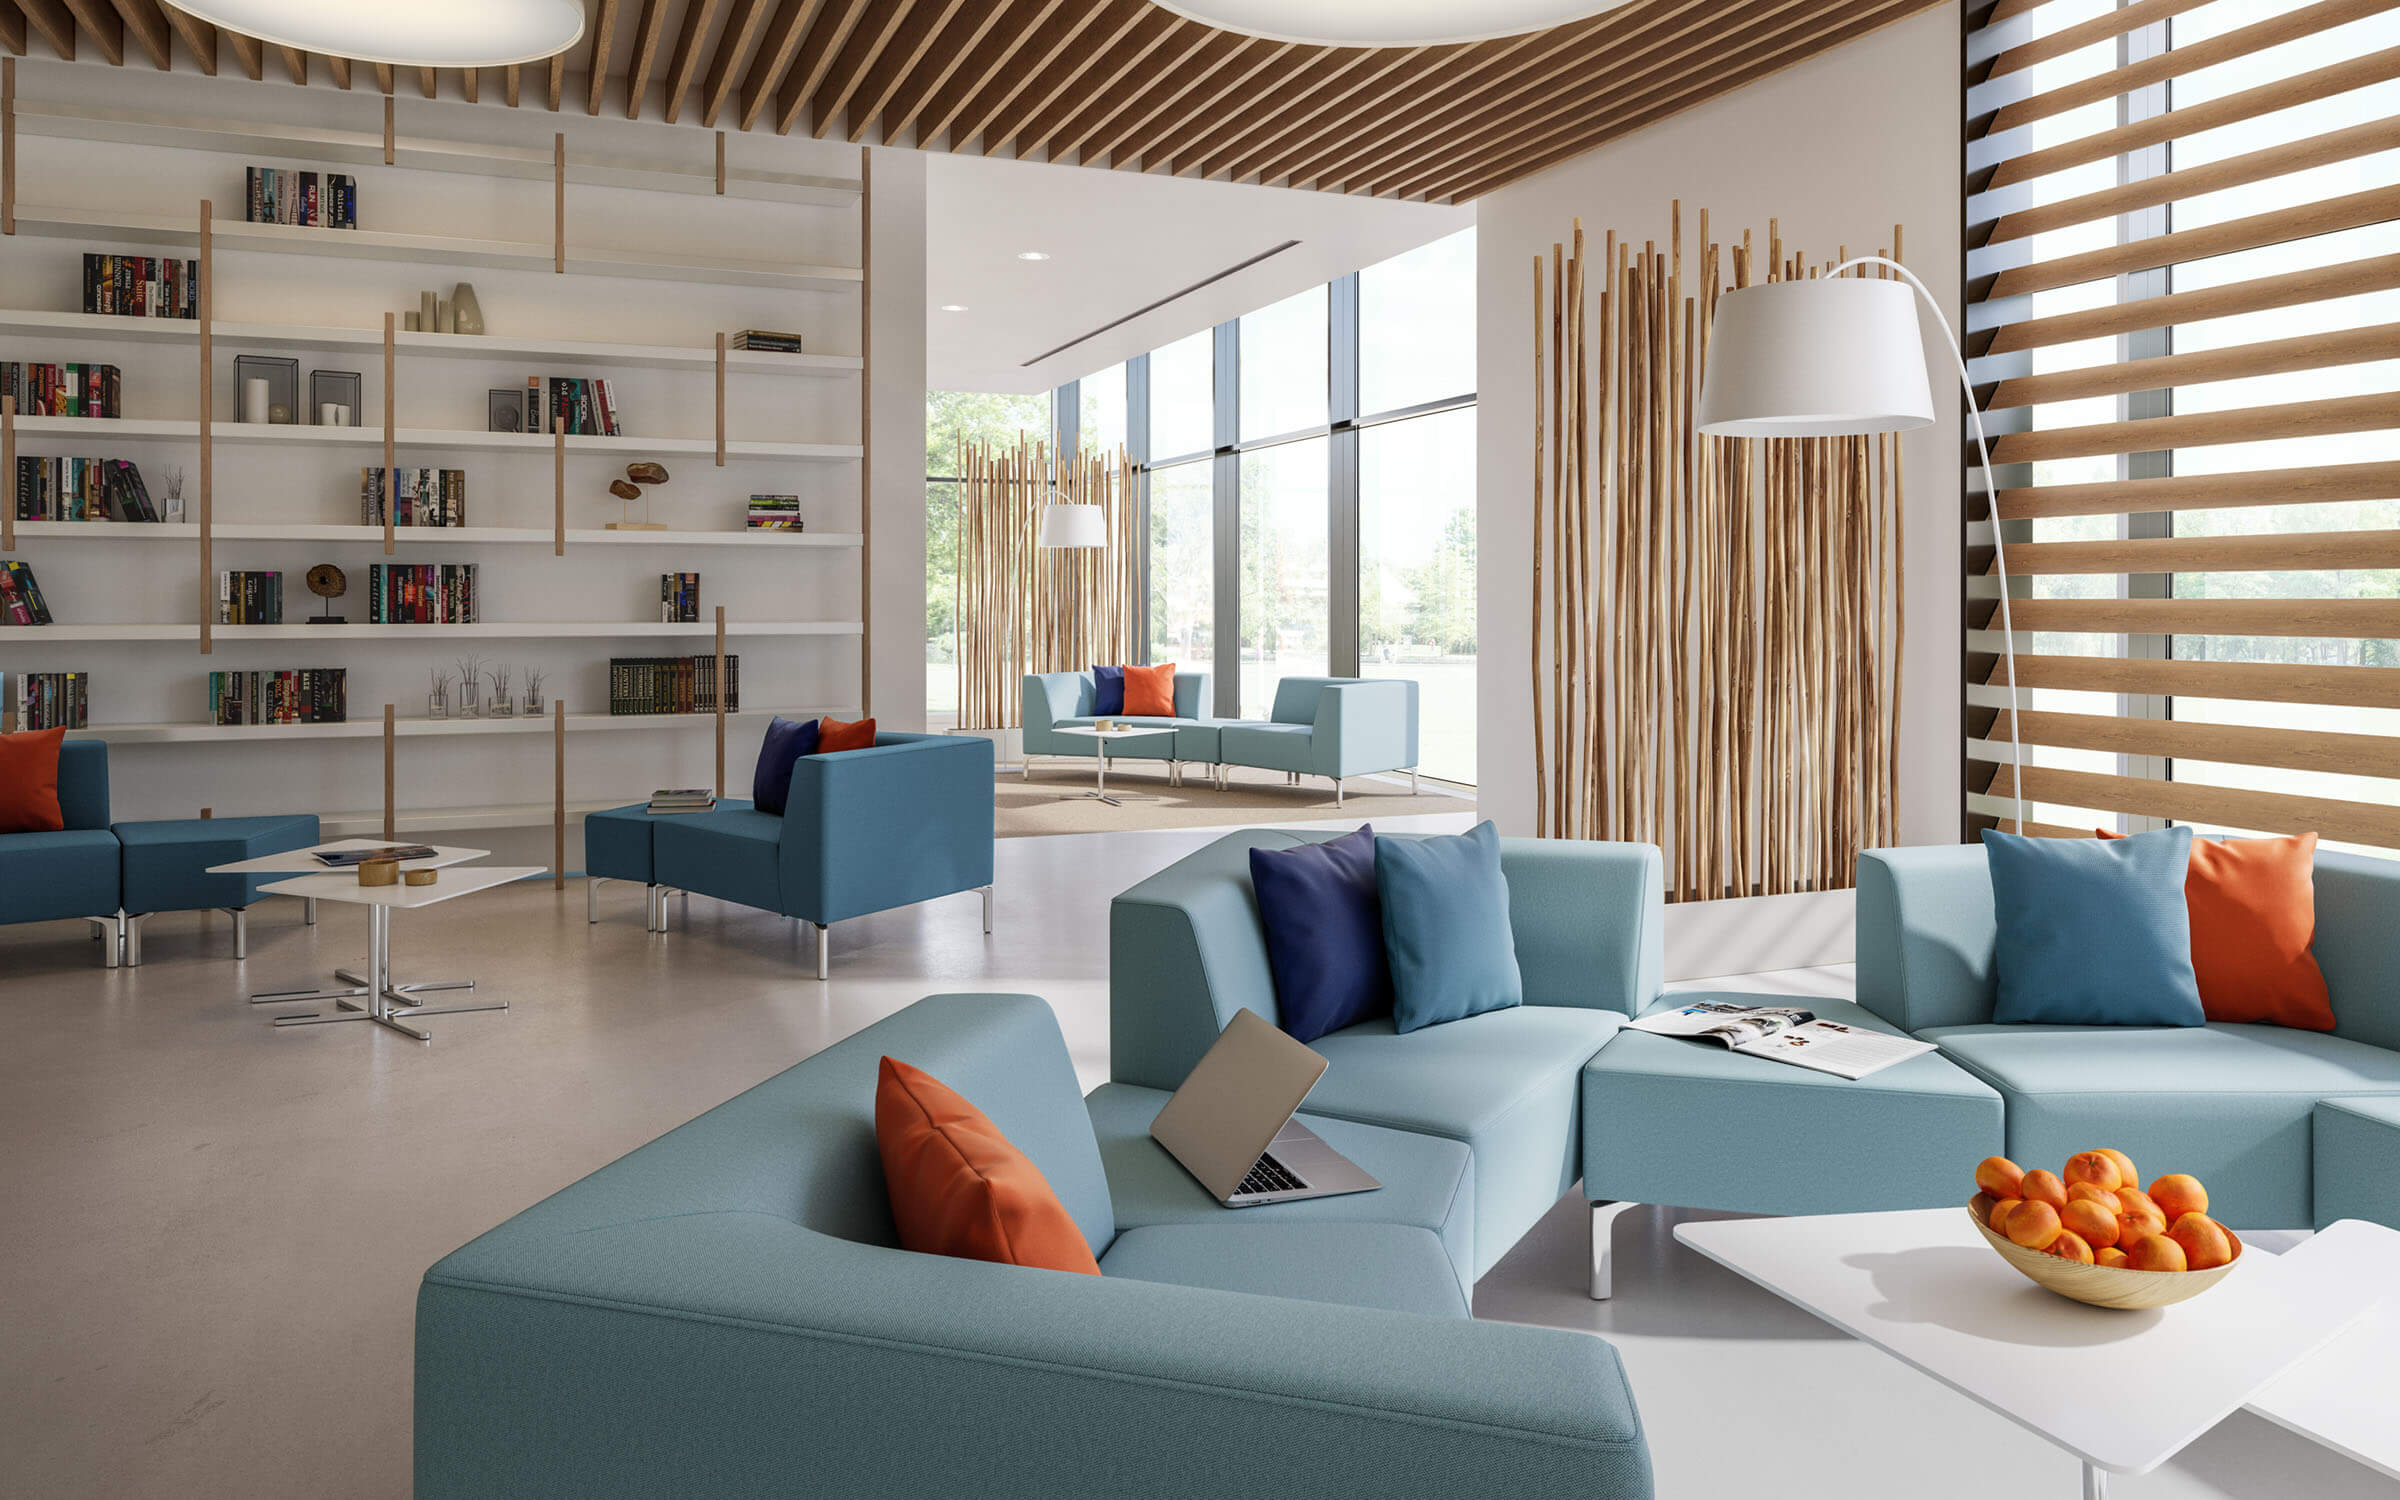 A quiet area with an open design and with variously arranged TANGRAM sofas in blue and TANGRAM tables in white.